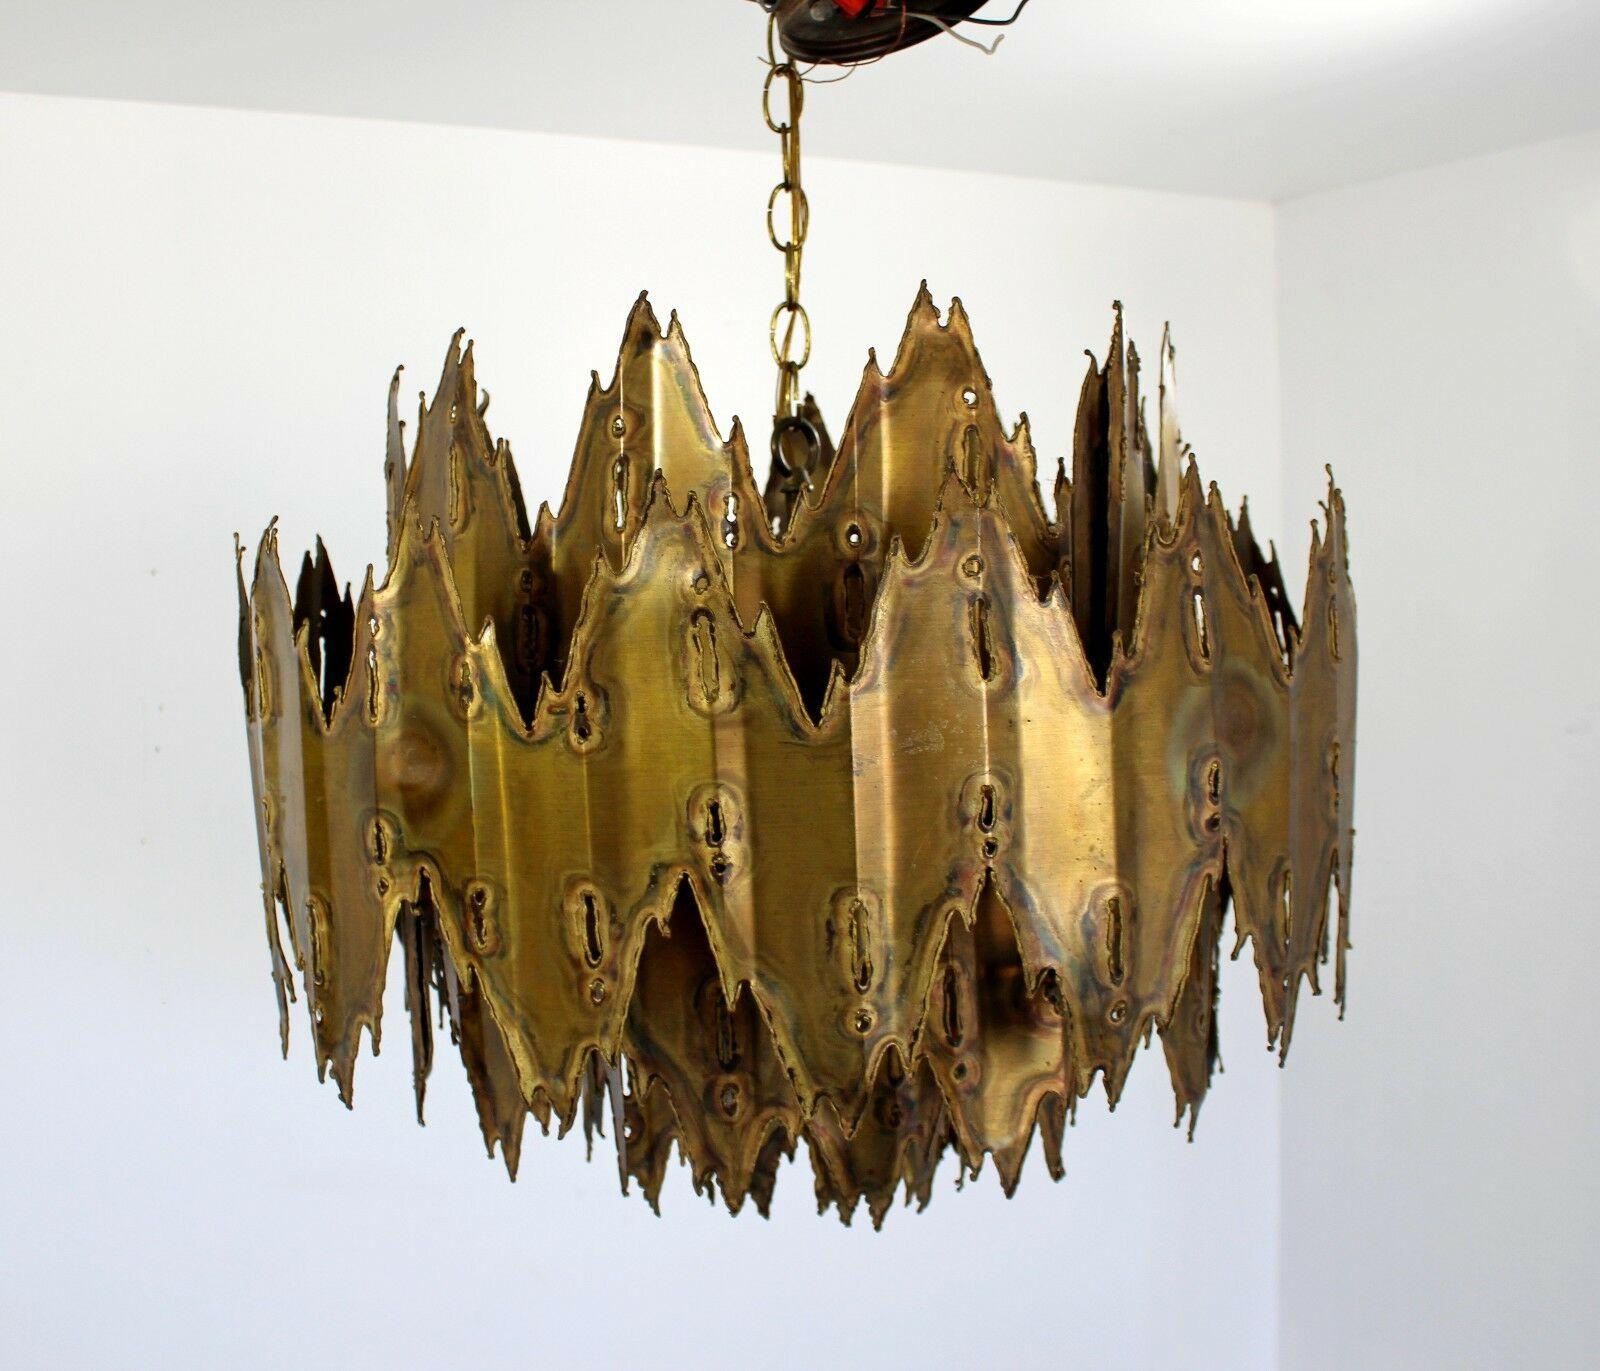 For your consideration is a gorgeous, Brutalist torch cut brass chandelier ceiling light fixture, by Tom Greene for Feldman Lighting Co. In excellent condition. The dimensions are 23